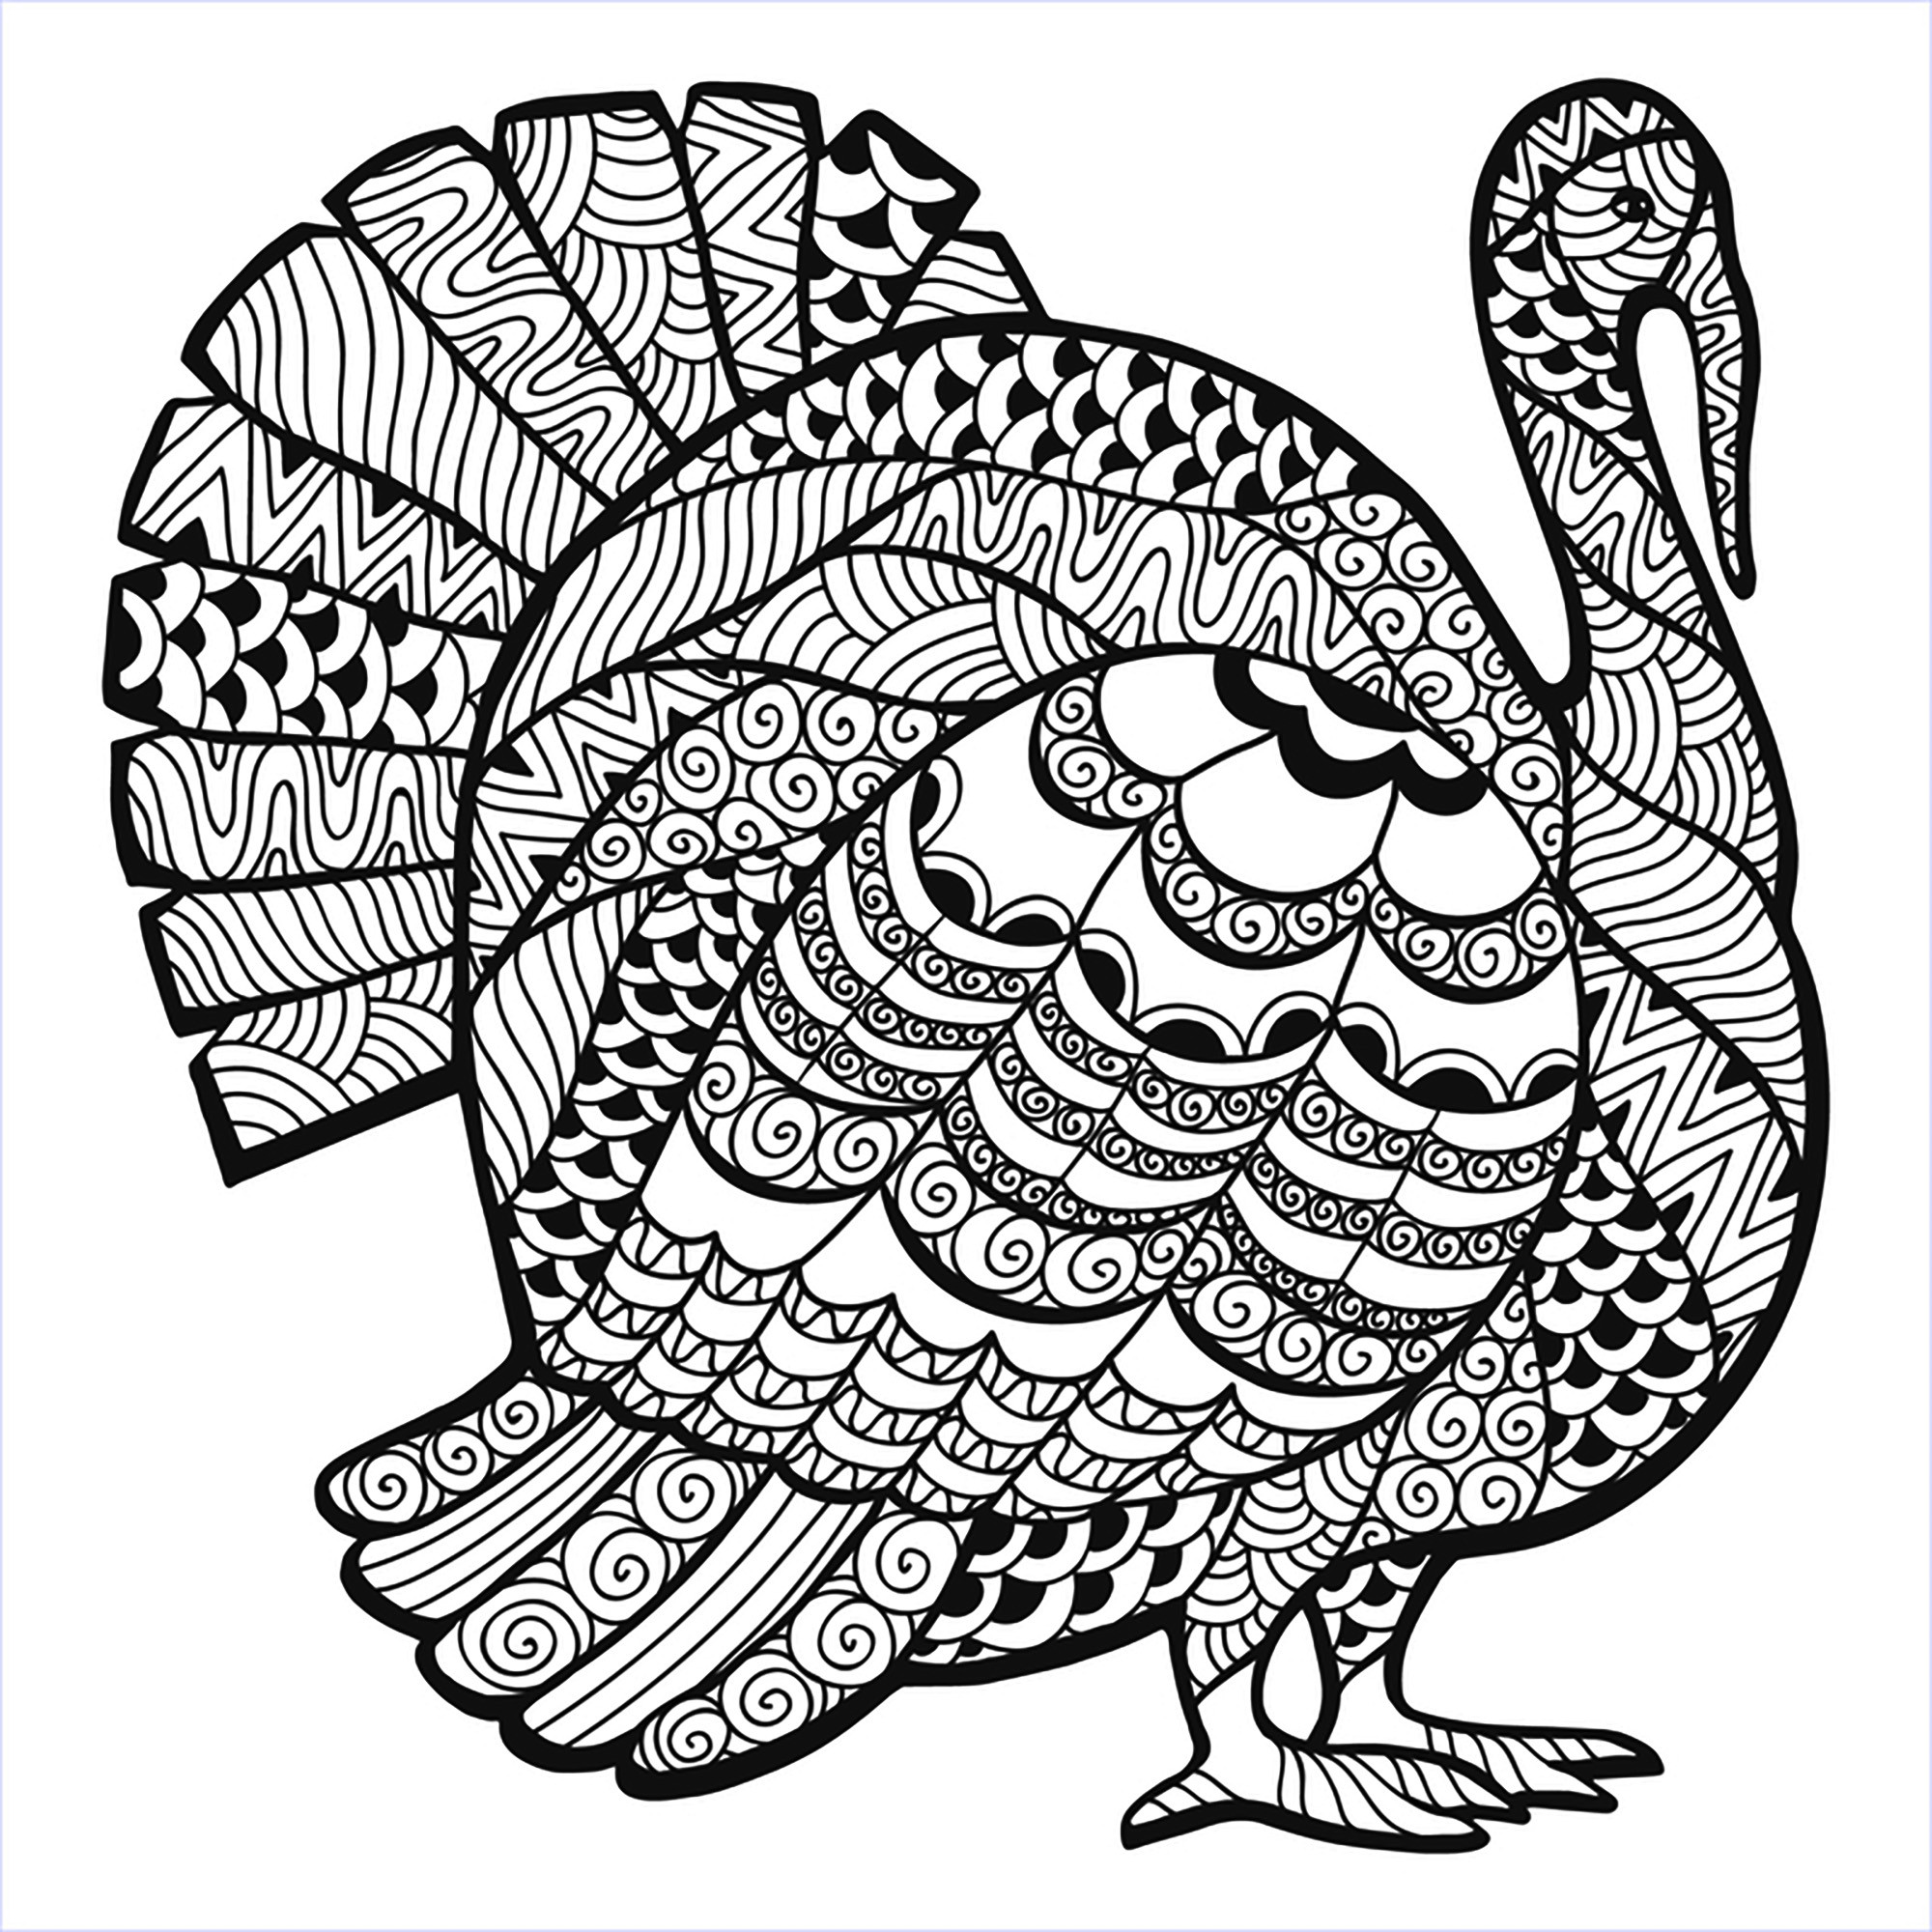 Turkey Printable Coloring Pages
 Thanksgiving Coloring Pages For Adults to and